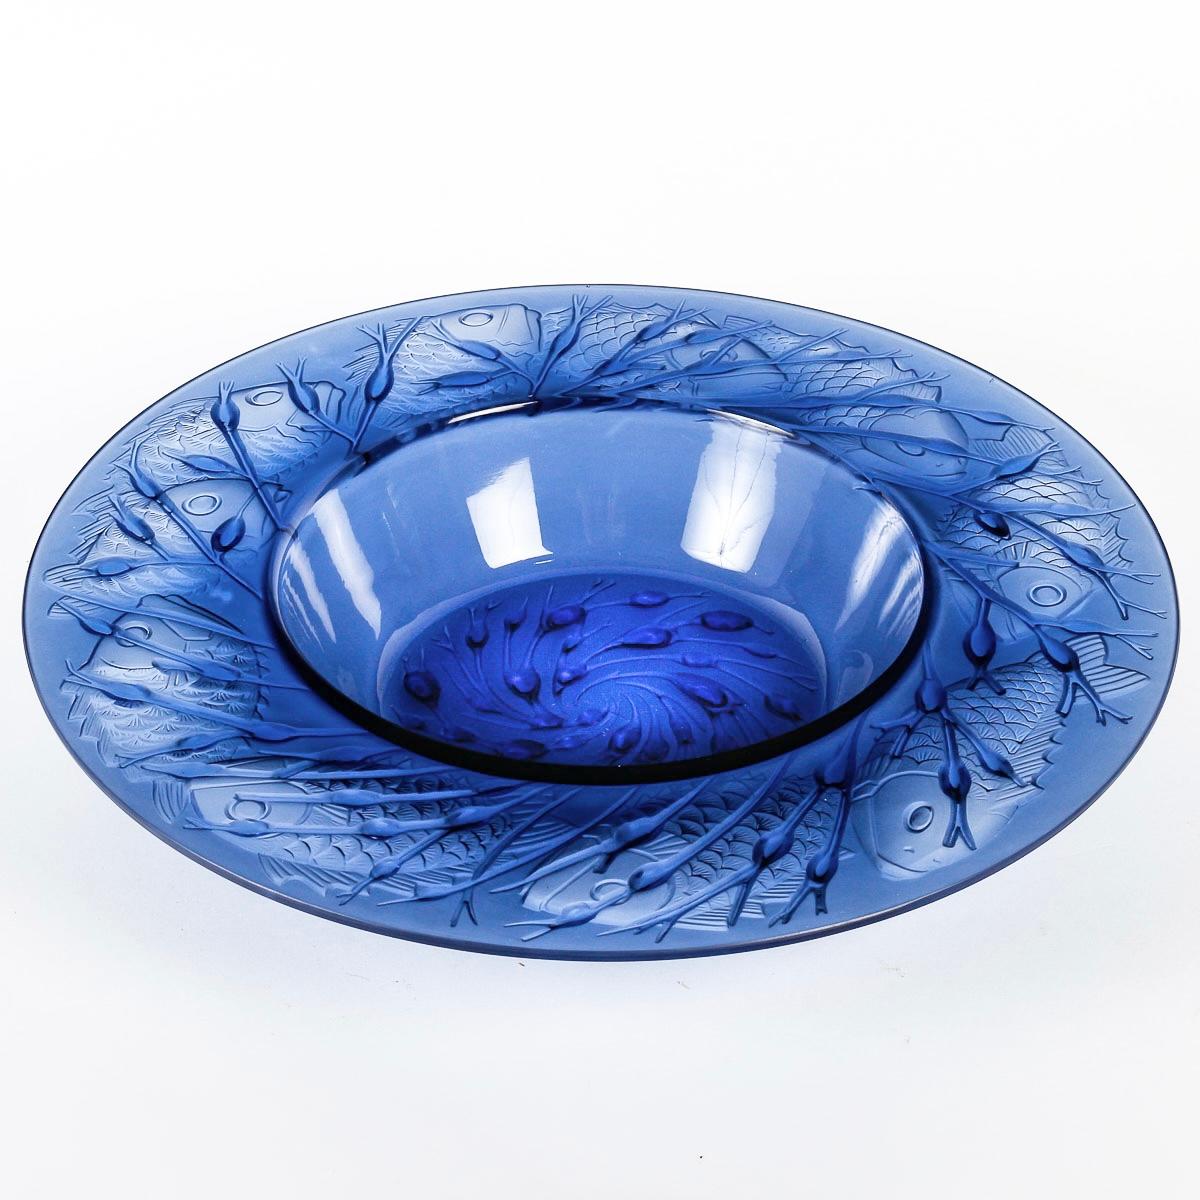 Molded 1930 René Lalique - Bowl Anvers Navy Blue Glass, Fishes For Sale